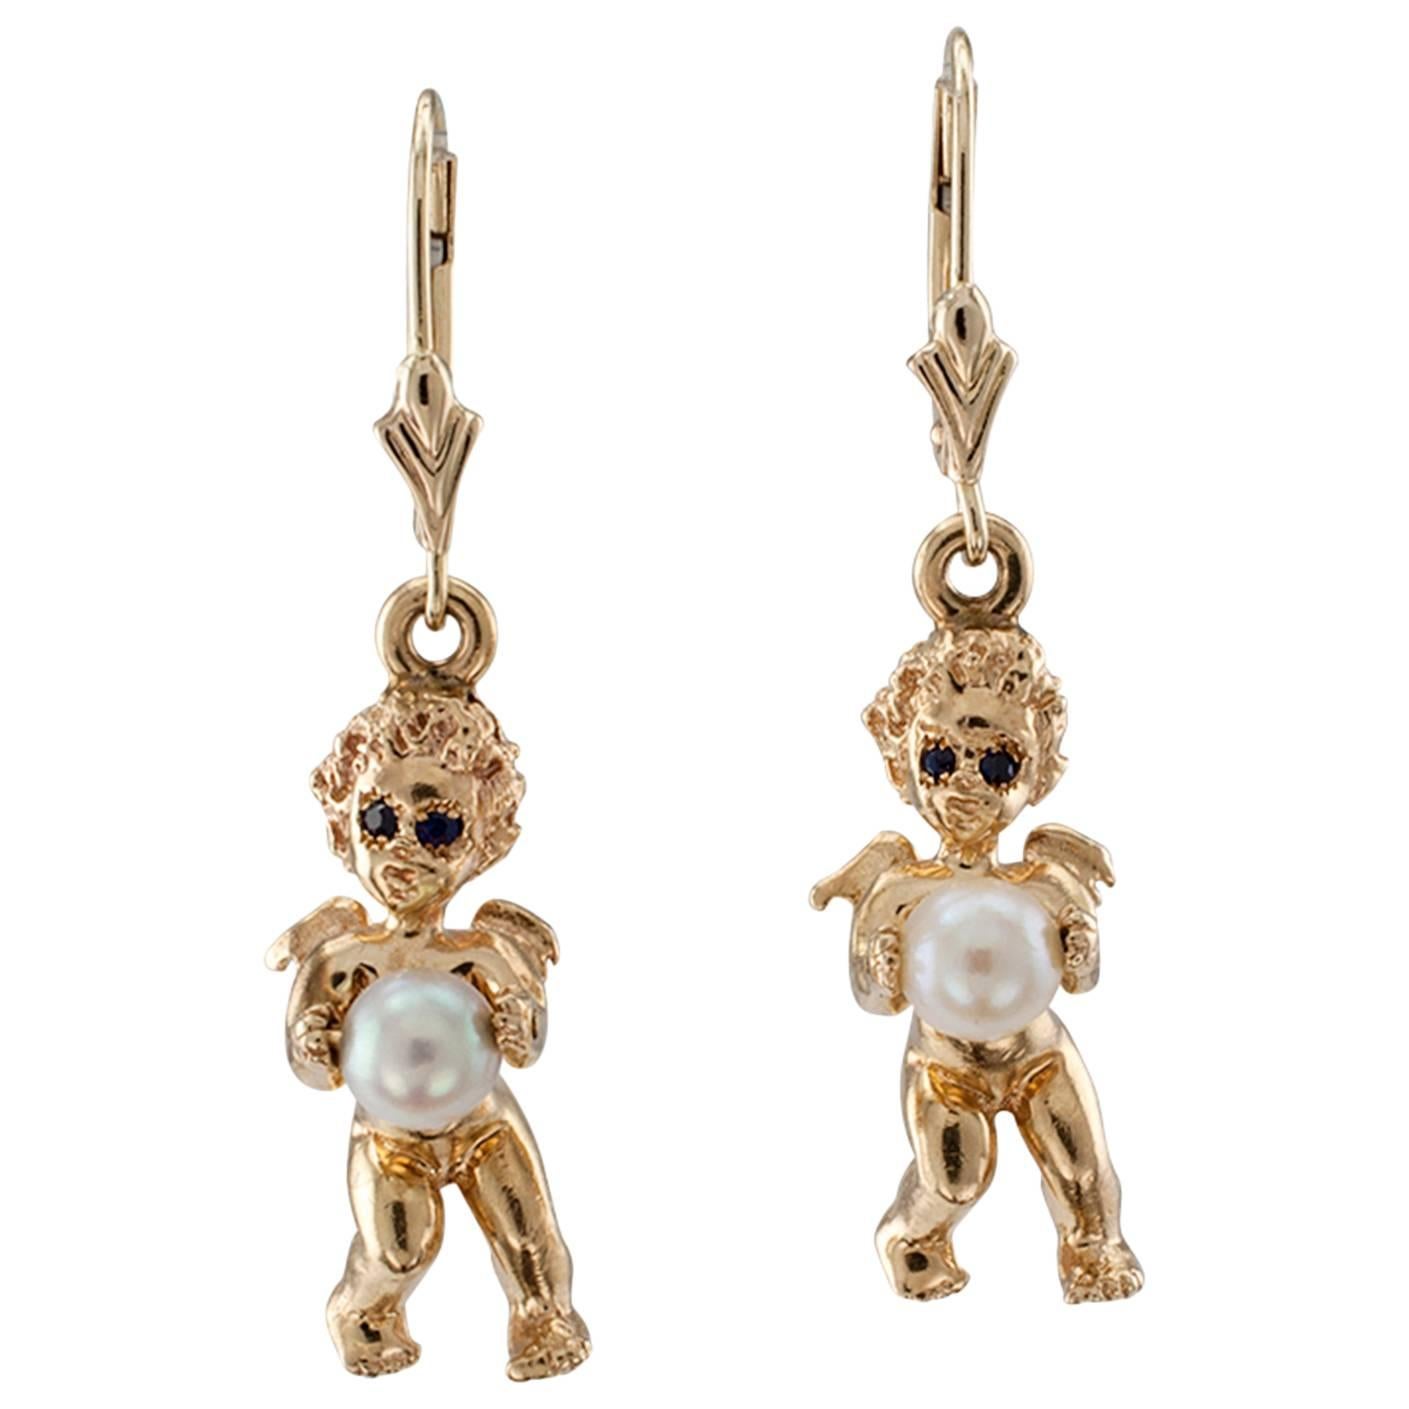 Gold and Cultured Pearl Cherub Earrings Attributed to Ruser